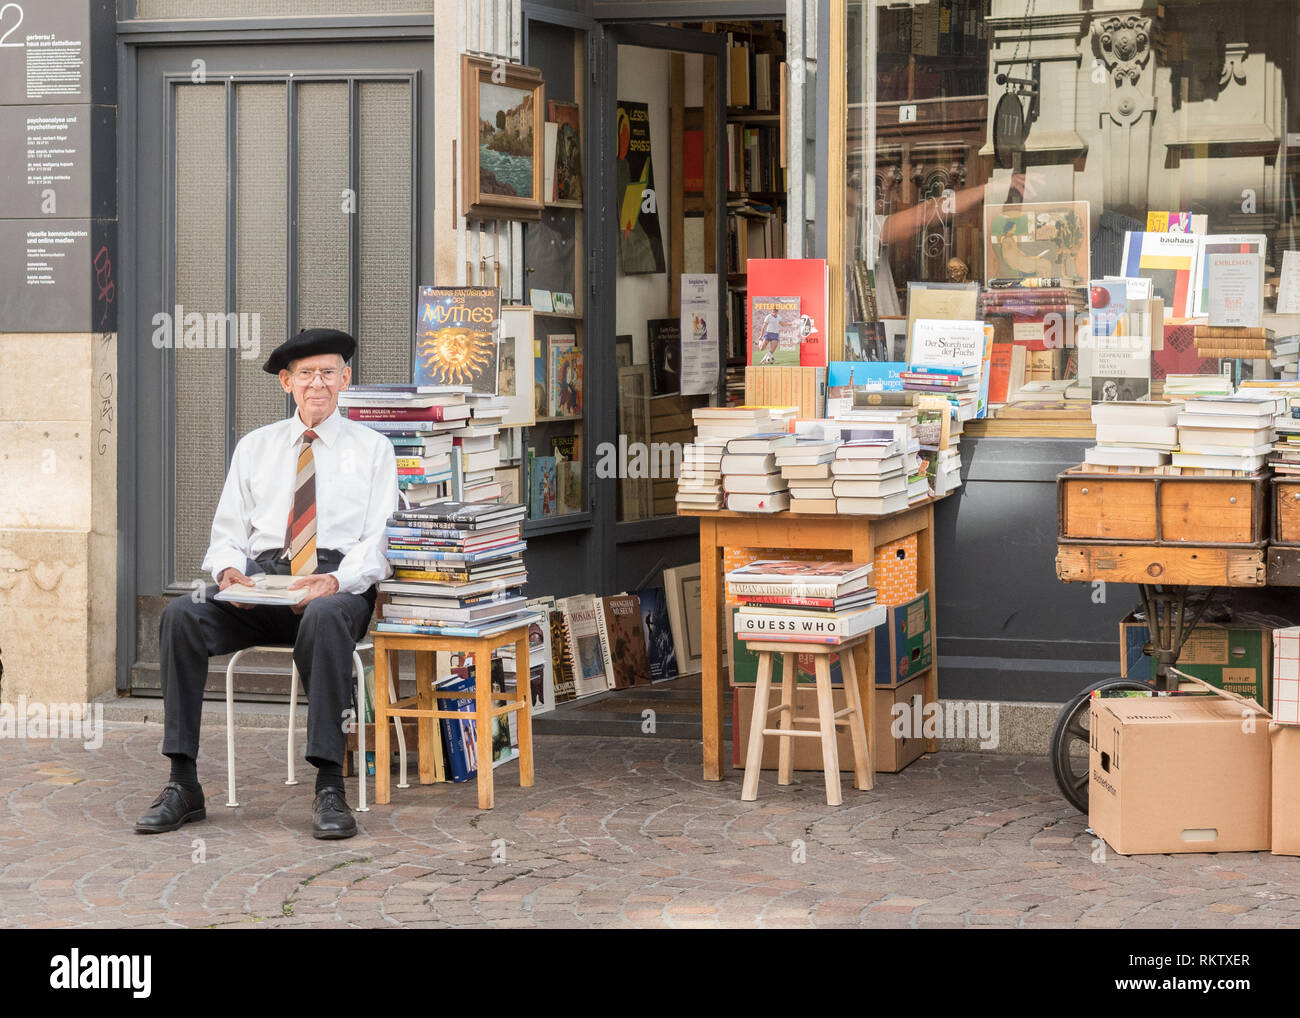 Antique Bookshop High Resolution Stock Photography And Images Alamy